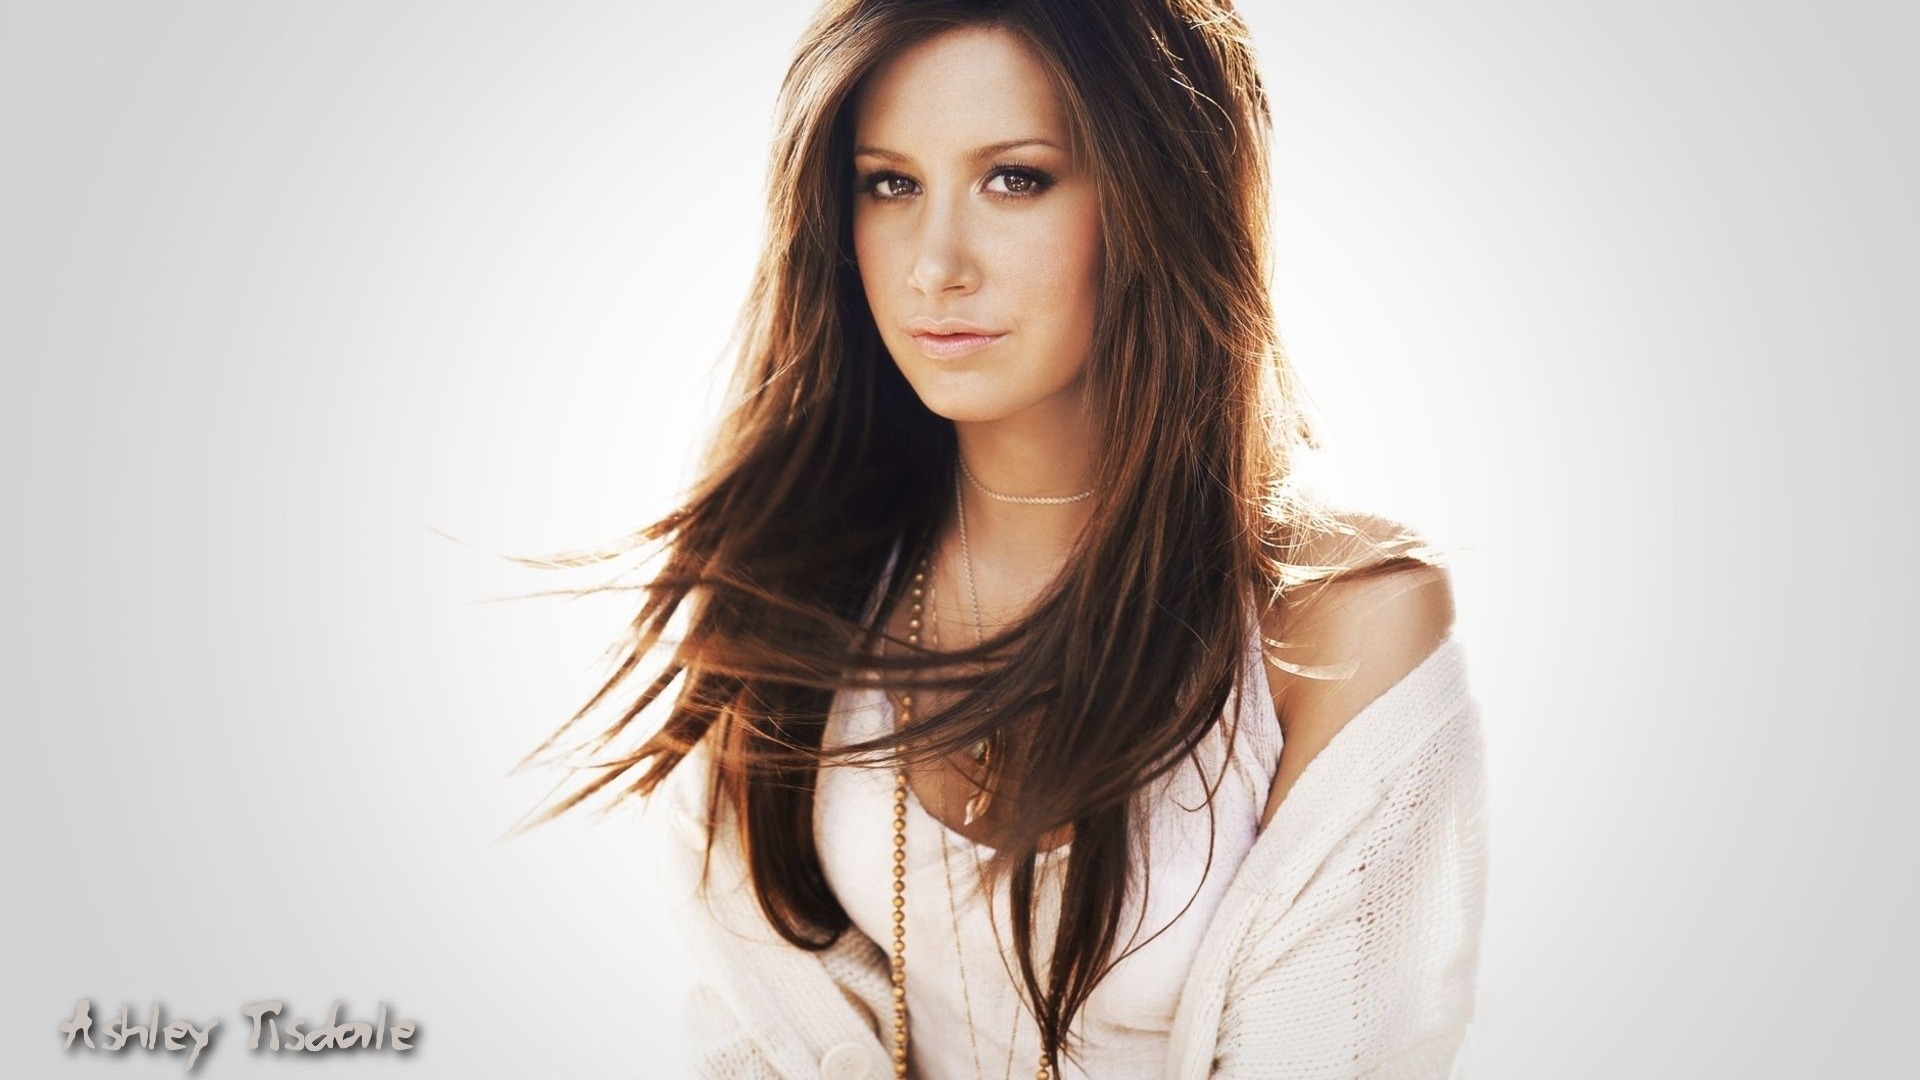 Ashley Tisdale #077 - 1920x1080 Wallpapers Pictures Photos Images